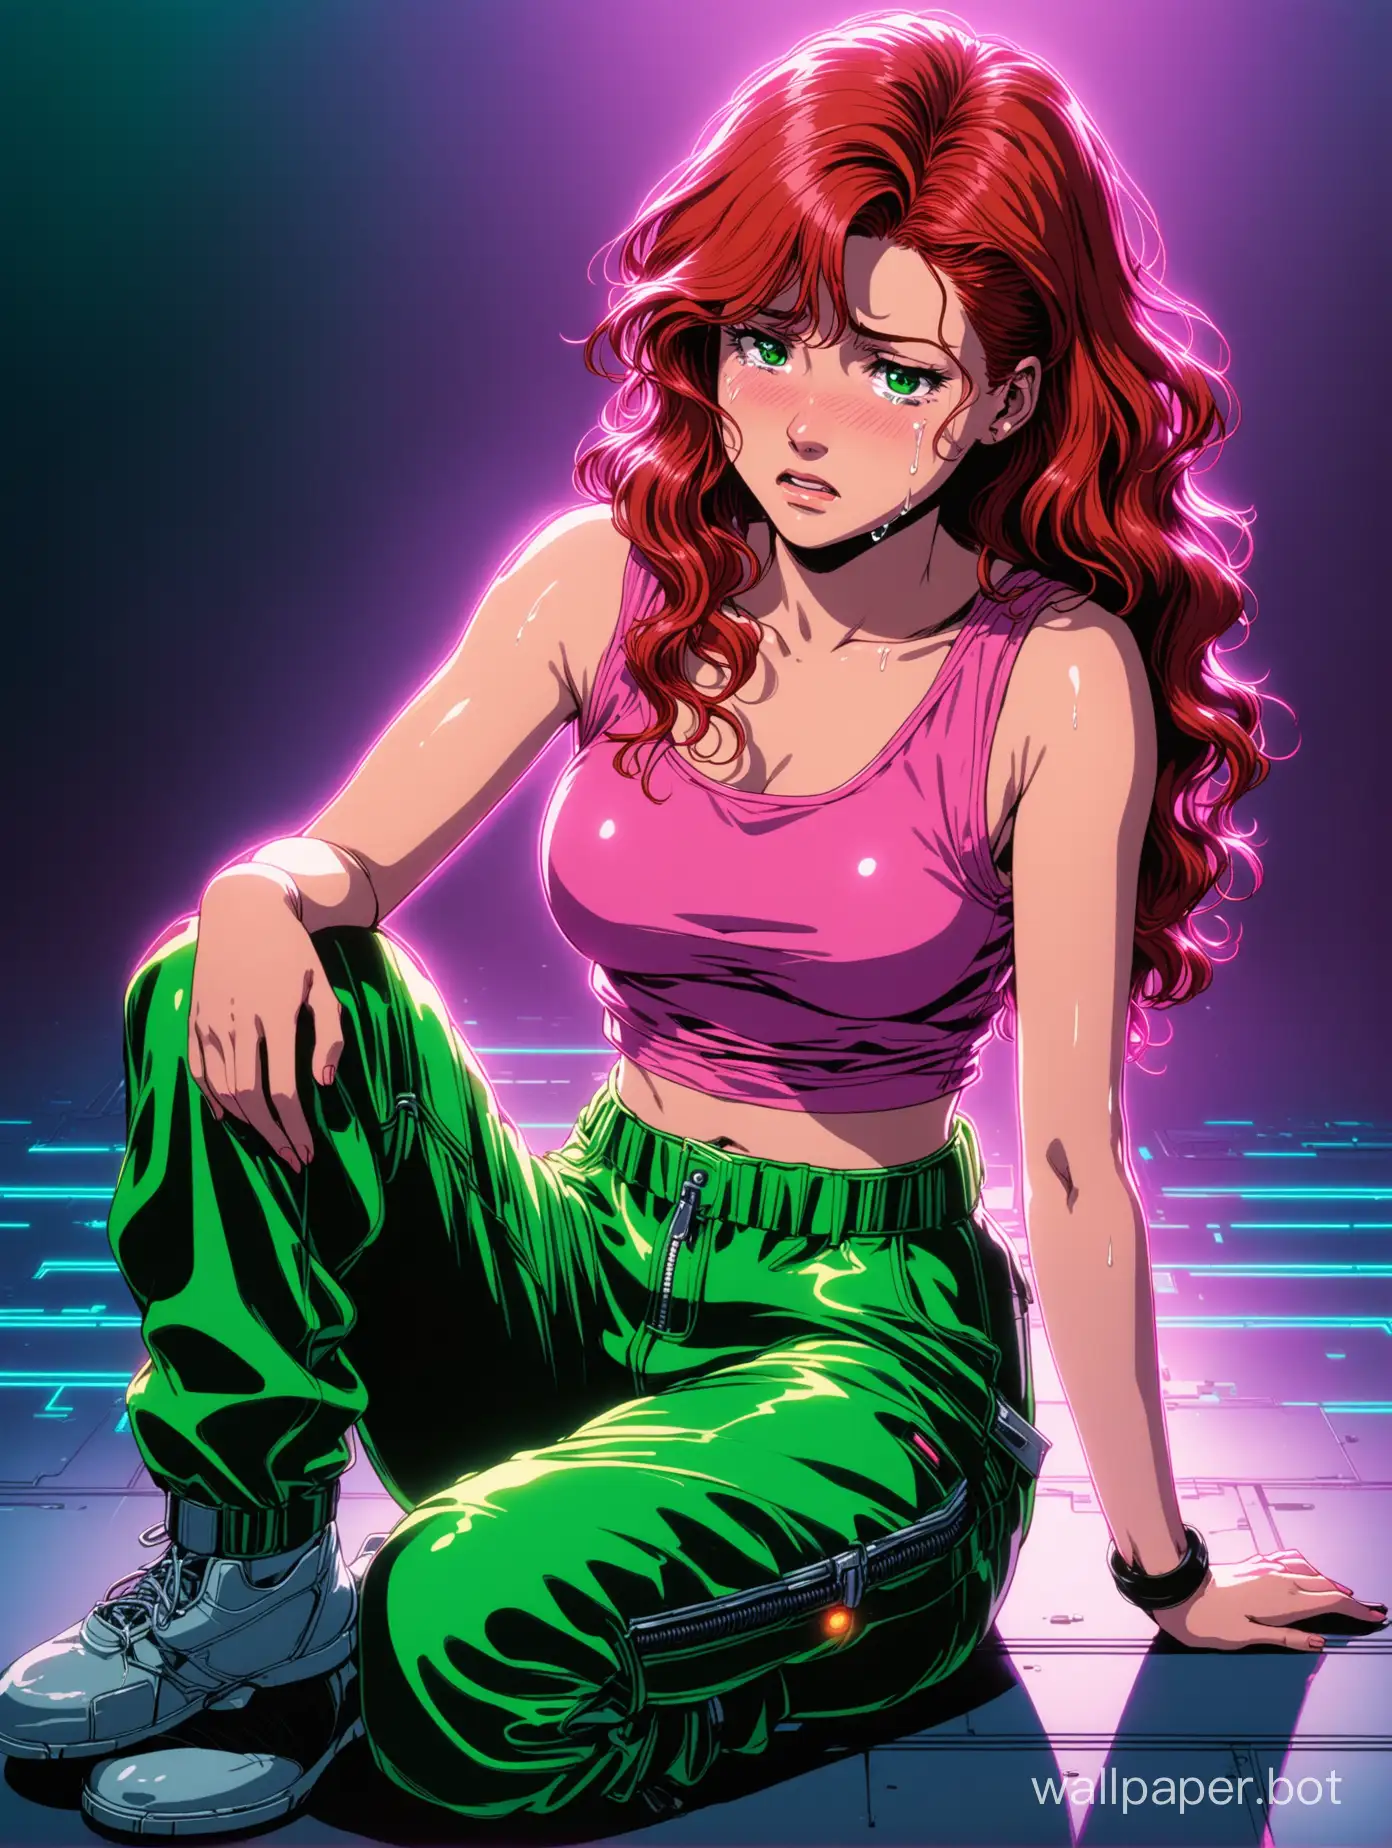 a young redhead woman sitting on the ground, crying desperately, she has a pretty face, she has long curly red hair, wearing a pink tank top, wearing dark green parachute pants, midriff, full body perspective, cyberpunk aesthetics, 1980s retro anime, glossy lighting, purple neon, very realistic, dingy and depressing